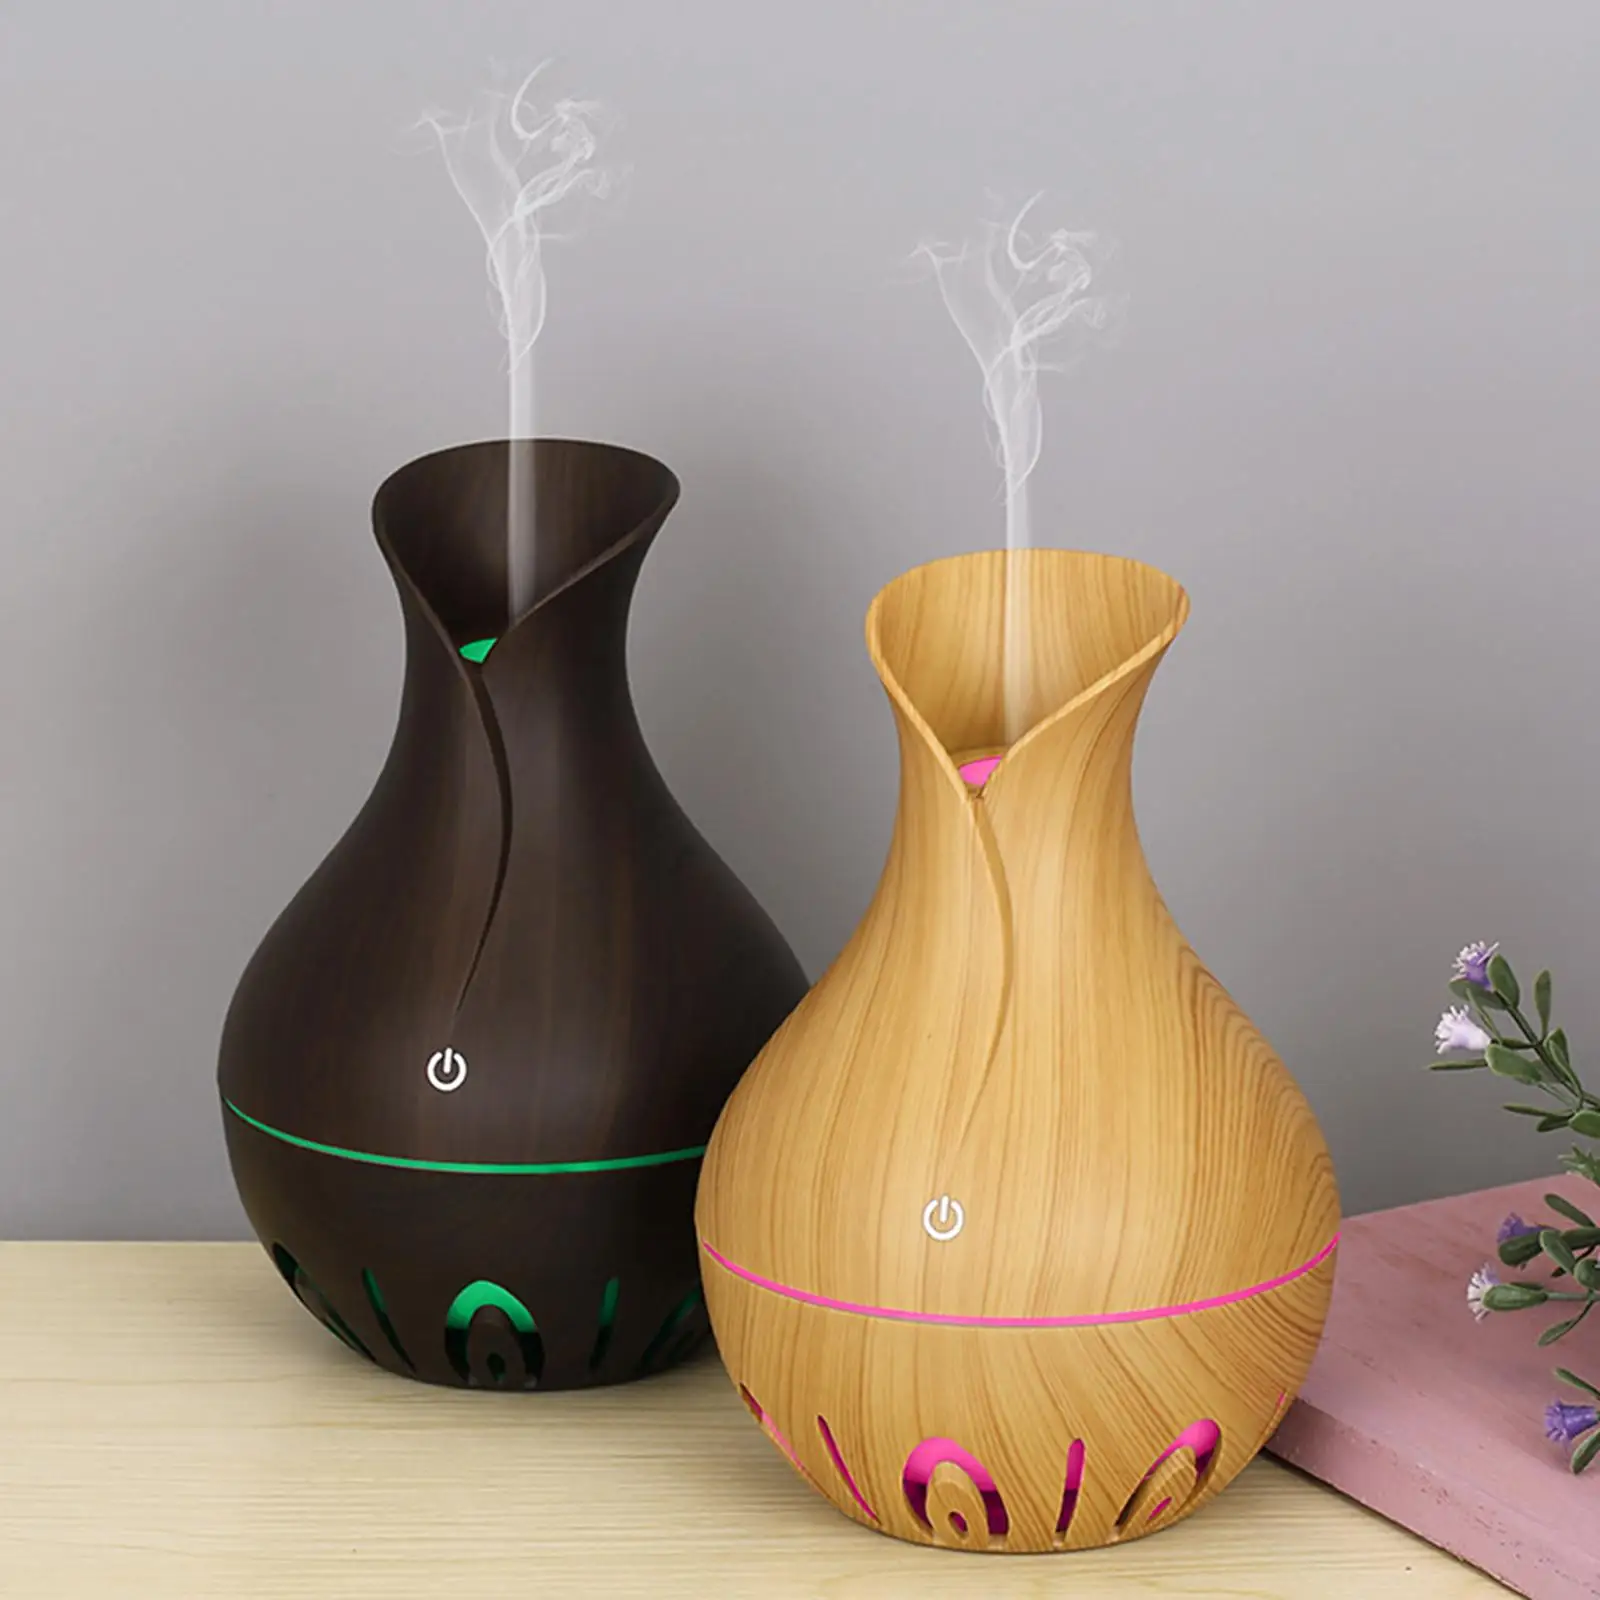 Essential Oil Diffuser Ultrasonic 7 Colors Wood Grain Super Quiet Purifier USB Aroma Diffuser for Gifts Baby Bedroom Bedroom Car